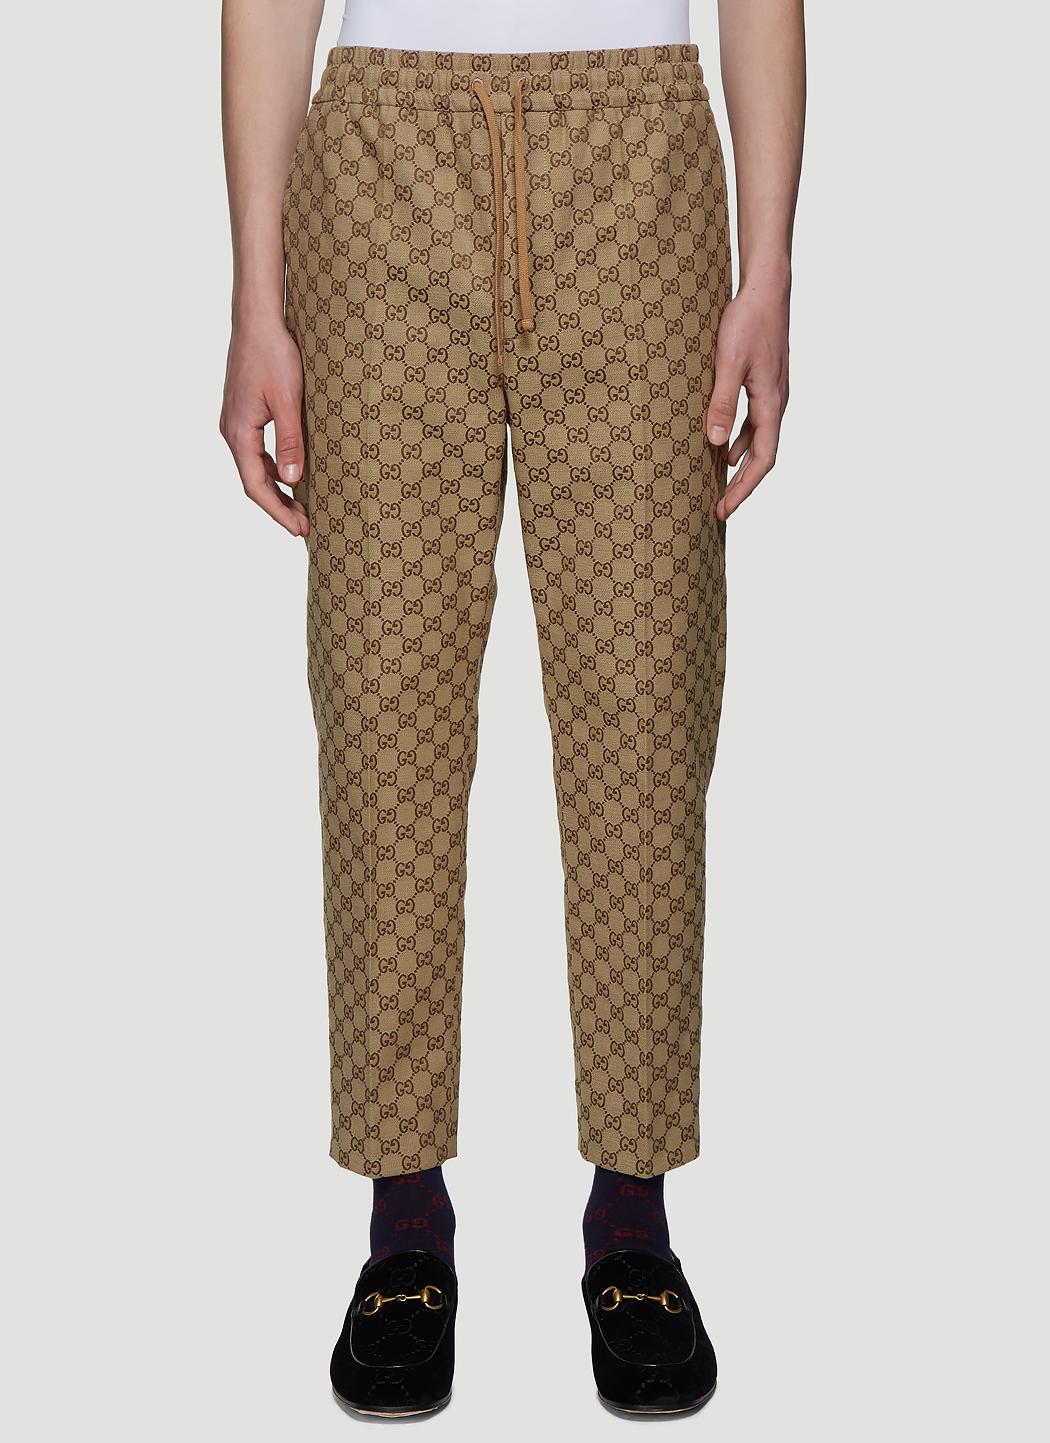 Gucci GG Canvas jogging Pant in Natural for Men - Save 34% - Lyst